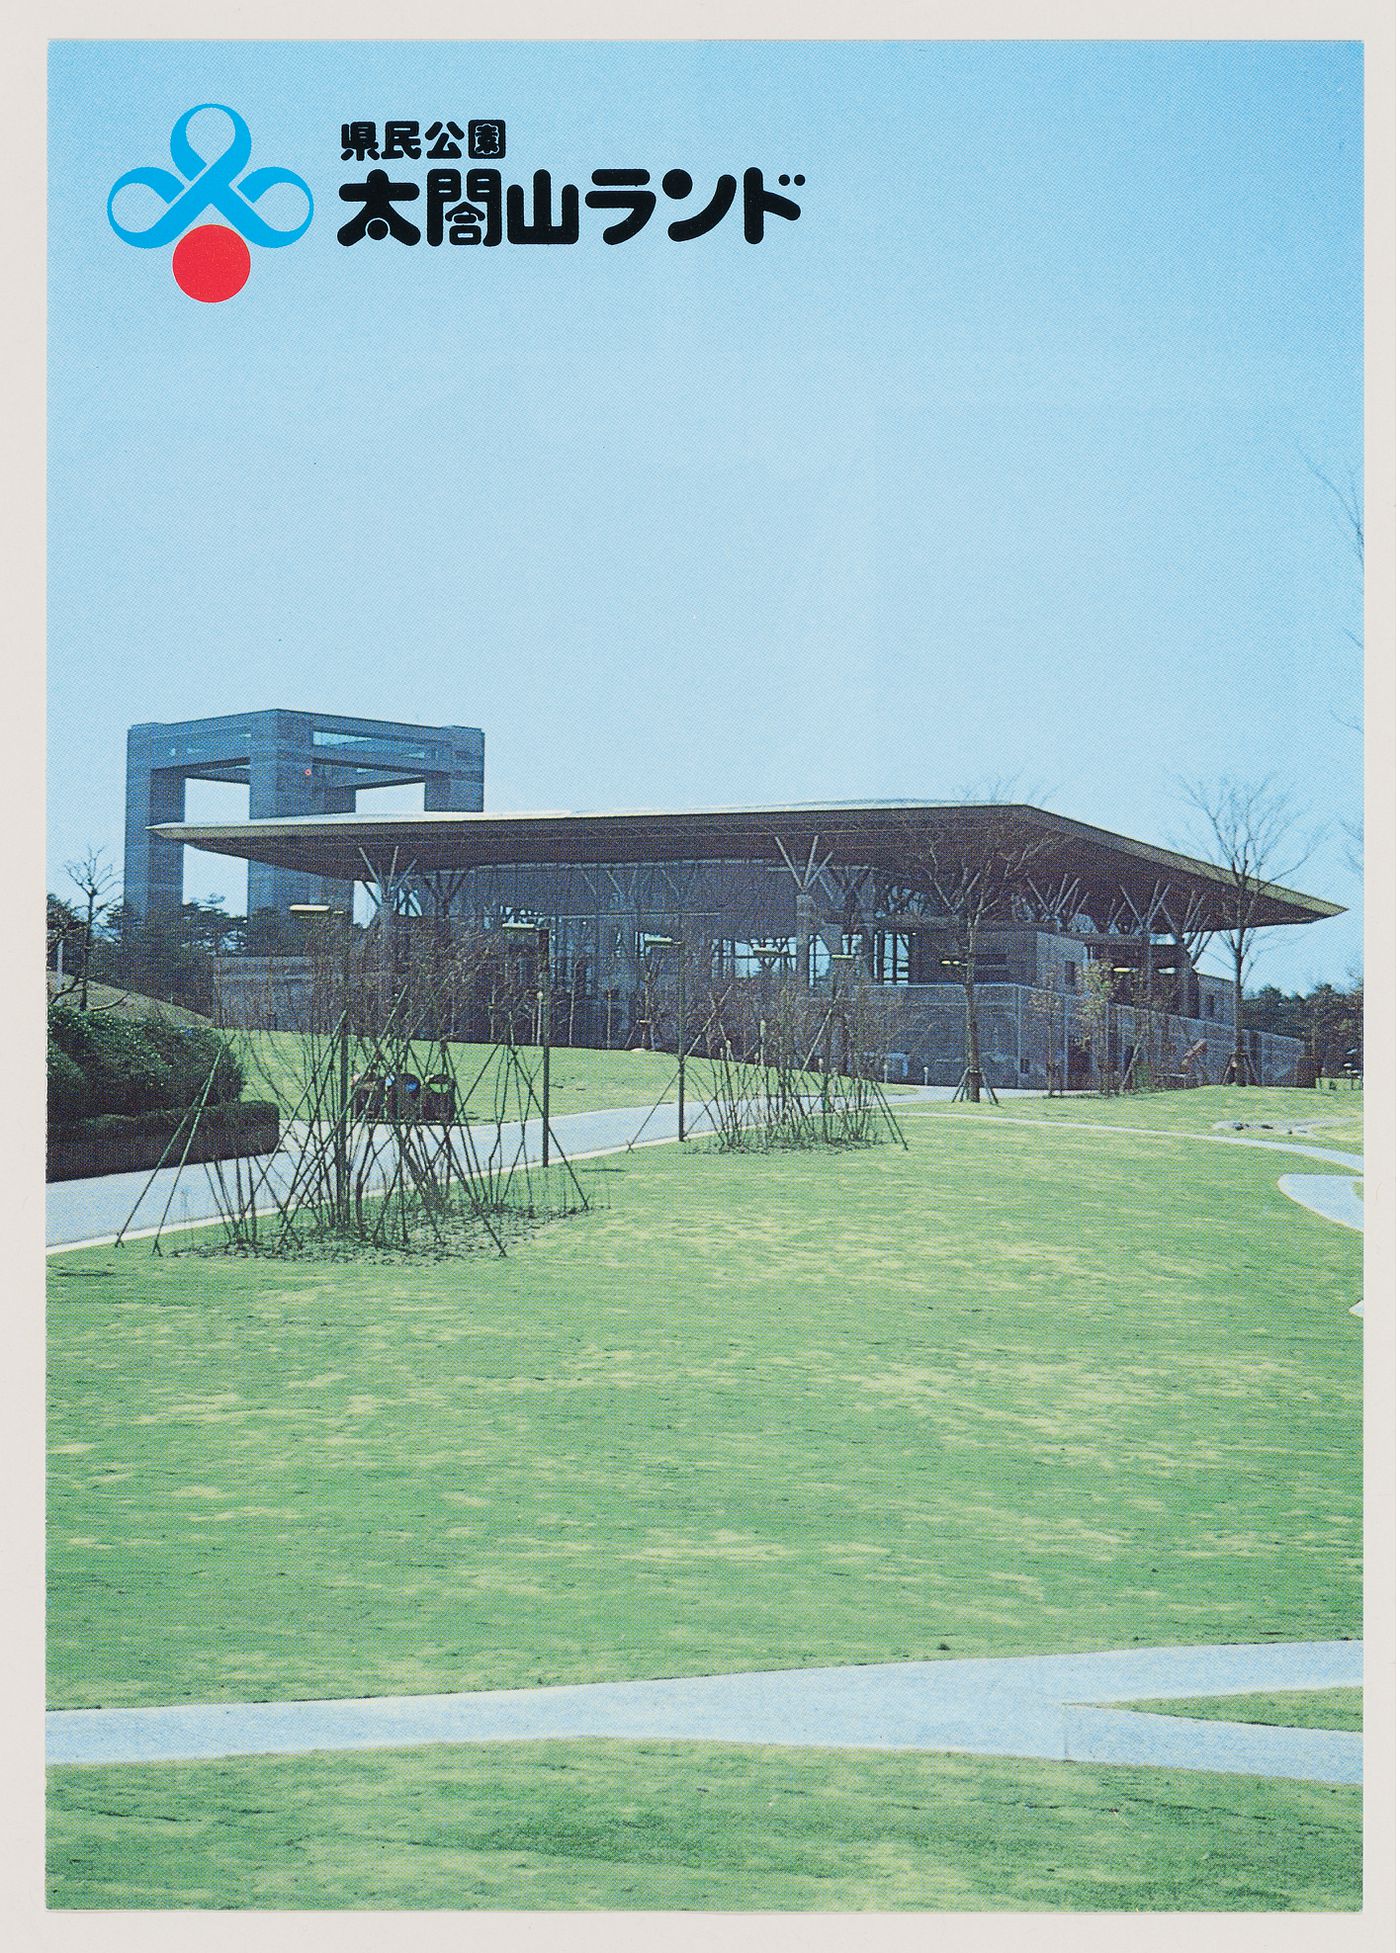 Leaflet about Taikoyama Land, Imizu, Toyama, Japan, with view of Galaxy Toyama,  Gymnasium, and Prospecta Toyama '92 Observatory Tower on the cover page